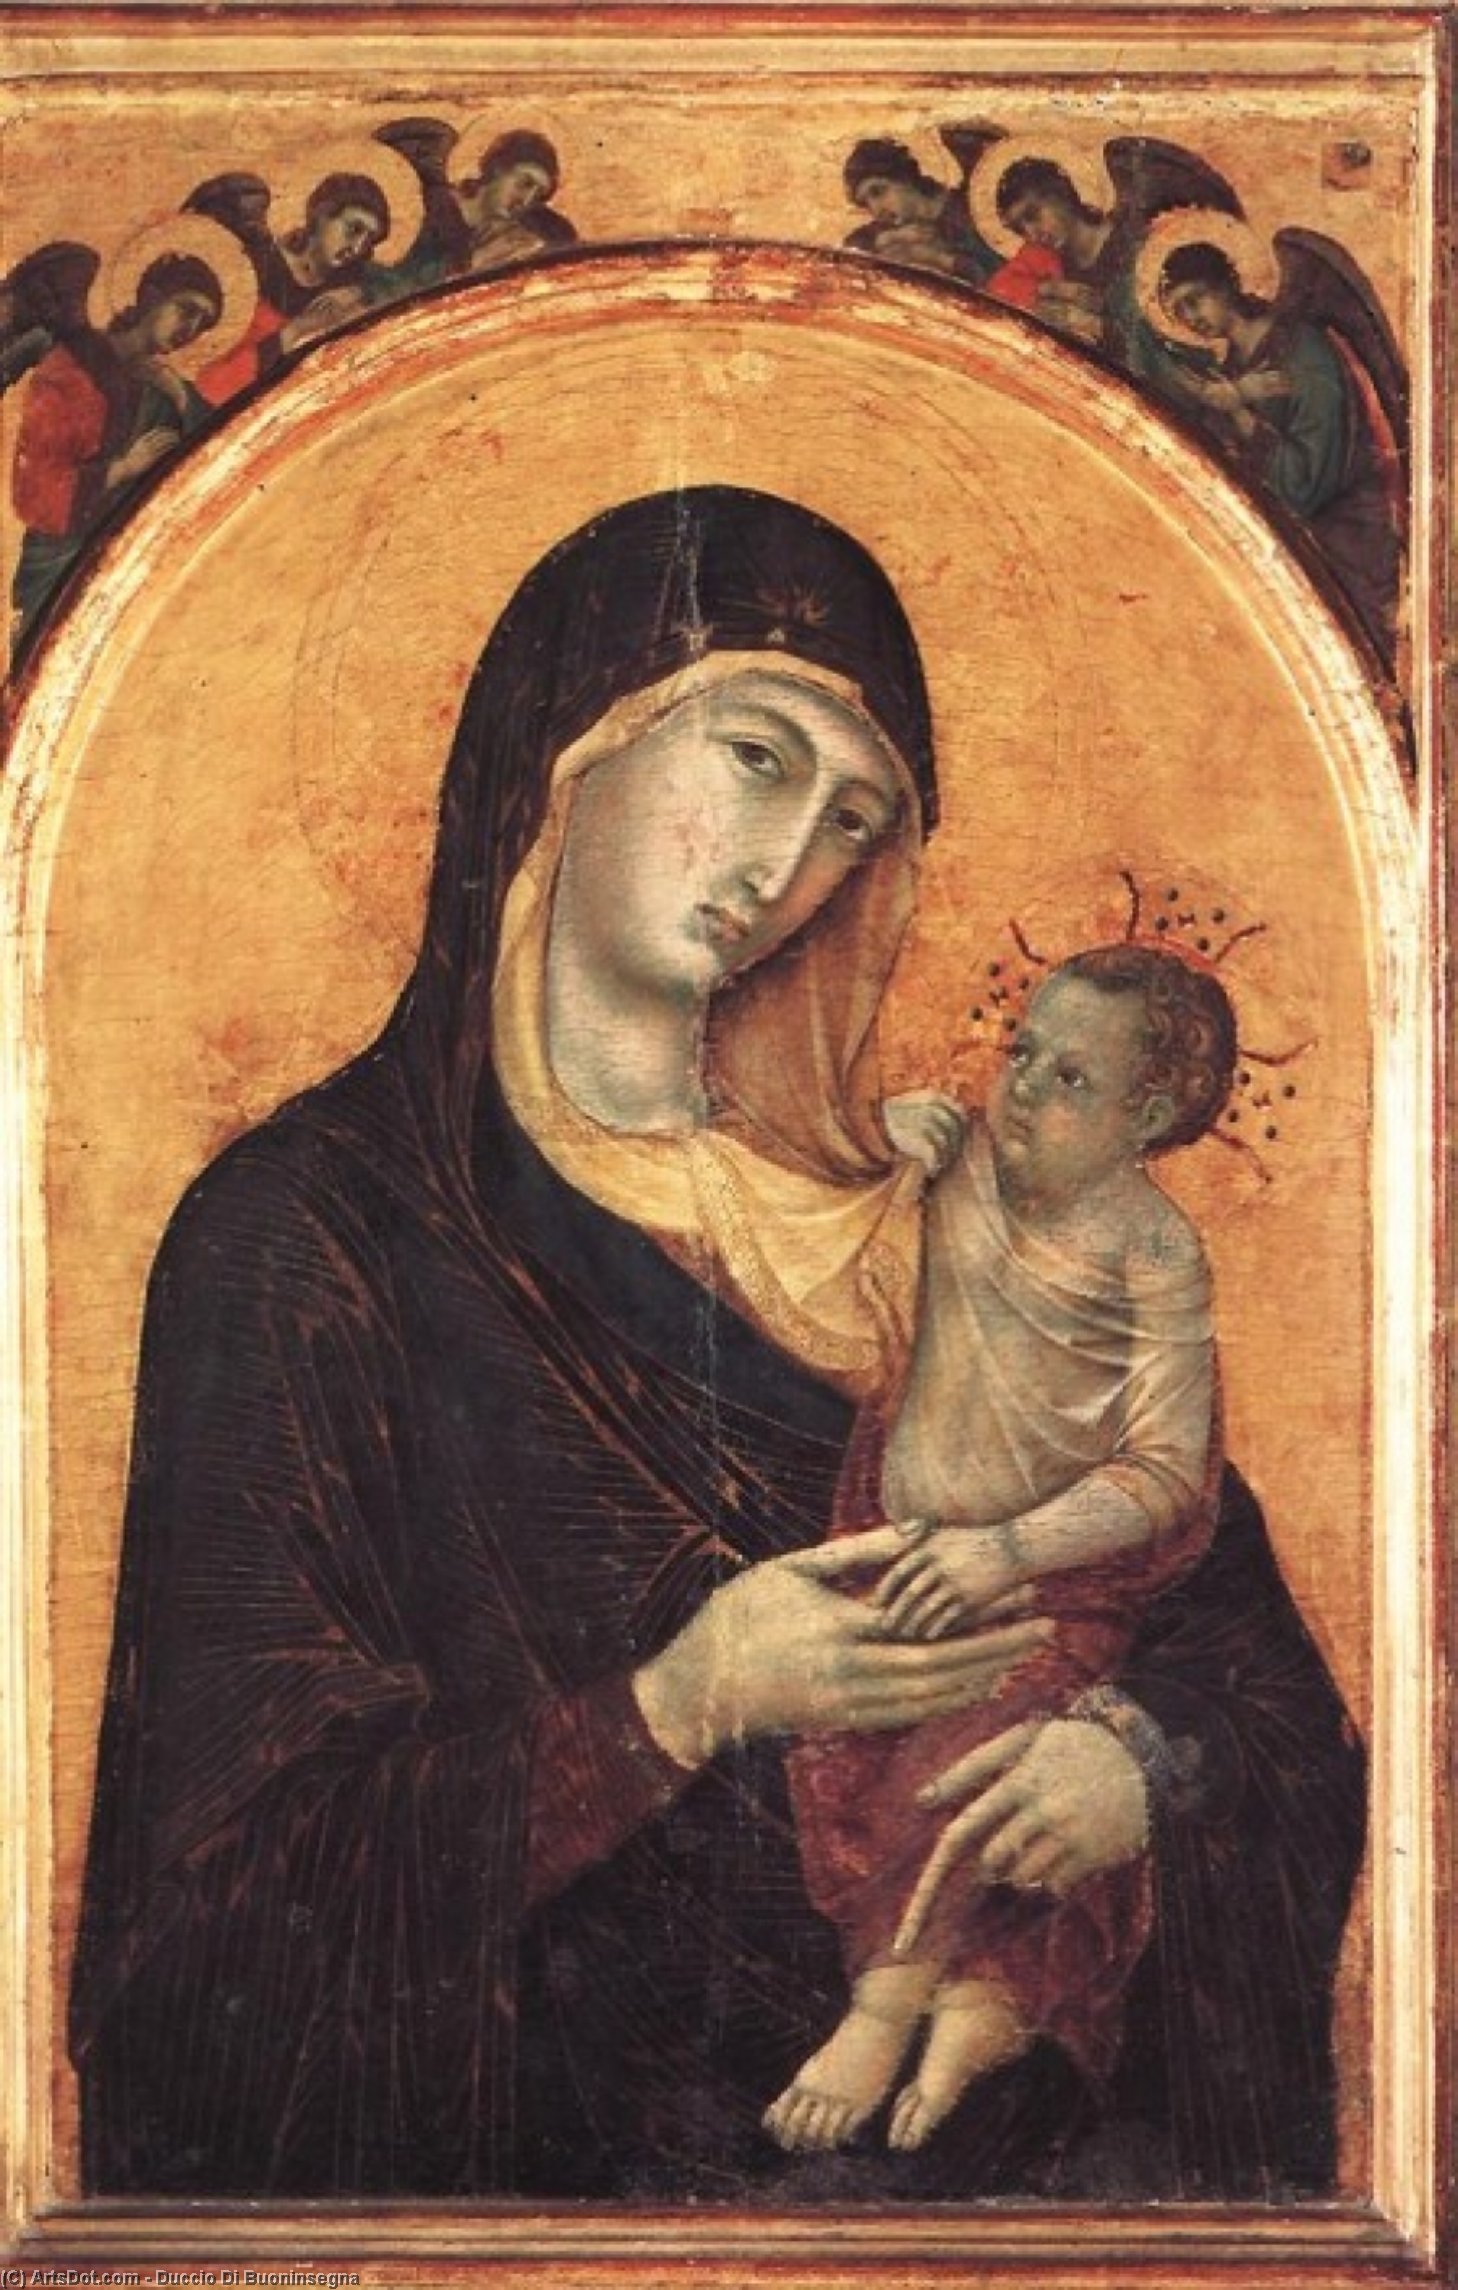 WikiOO.org - 백과 사전 - 회화, 삽화 Duccio Di Buoninsegna - Madonna and Child with Six Angels